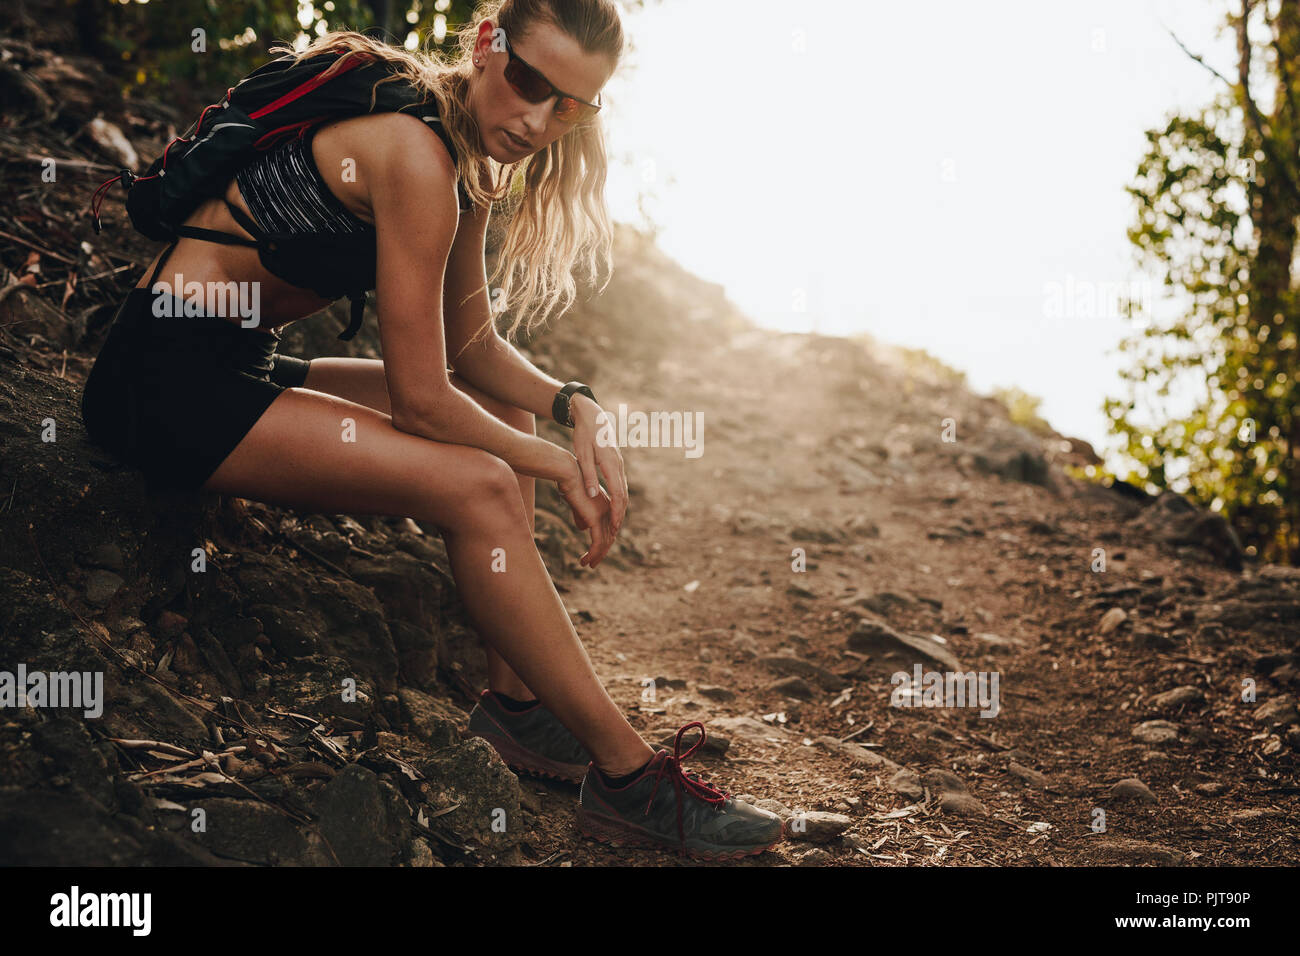 Athletic girl resting on rocks after a hard training in the mountains. Woman trail runner taking a break after running exercise. Stock Photo